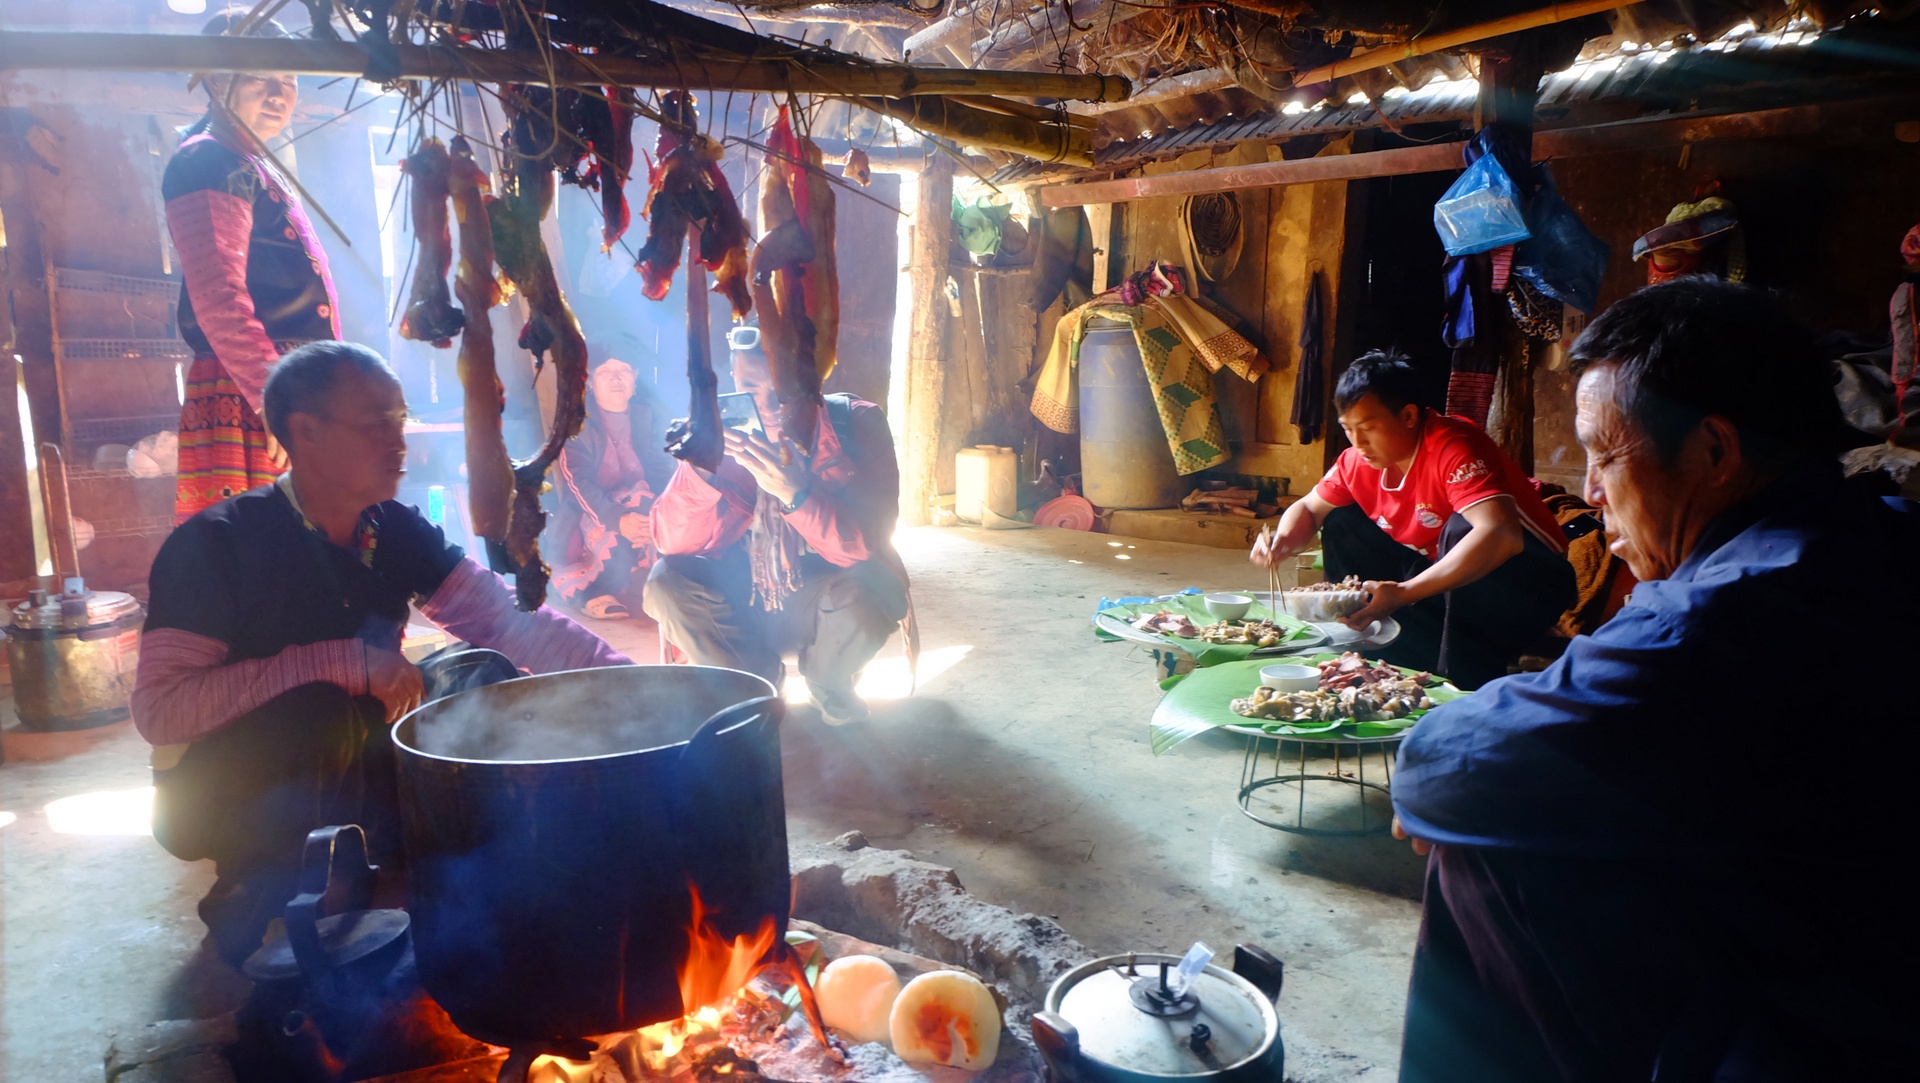 Pieces of pork hung over a burning coal stove, with slightly burned banh day – a traditional rice cake – nearby.